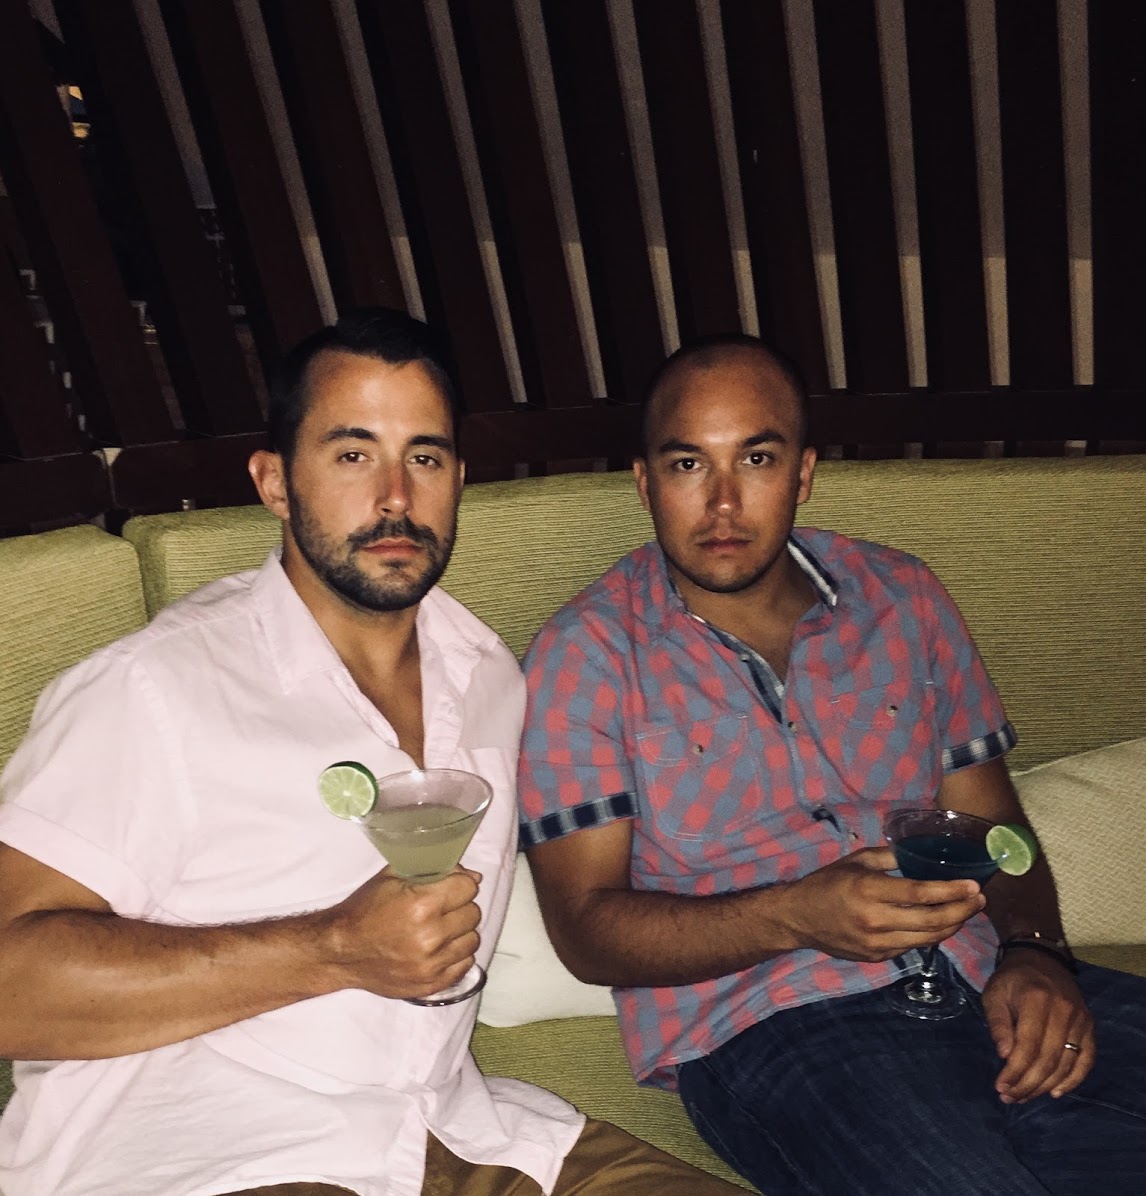 Our gentlemen with martinis in the Dominican Republic